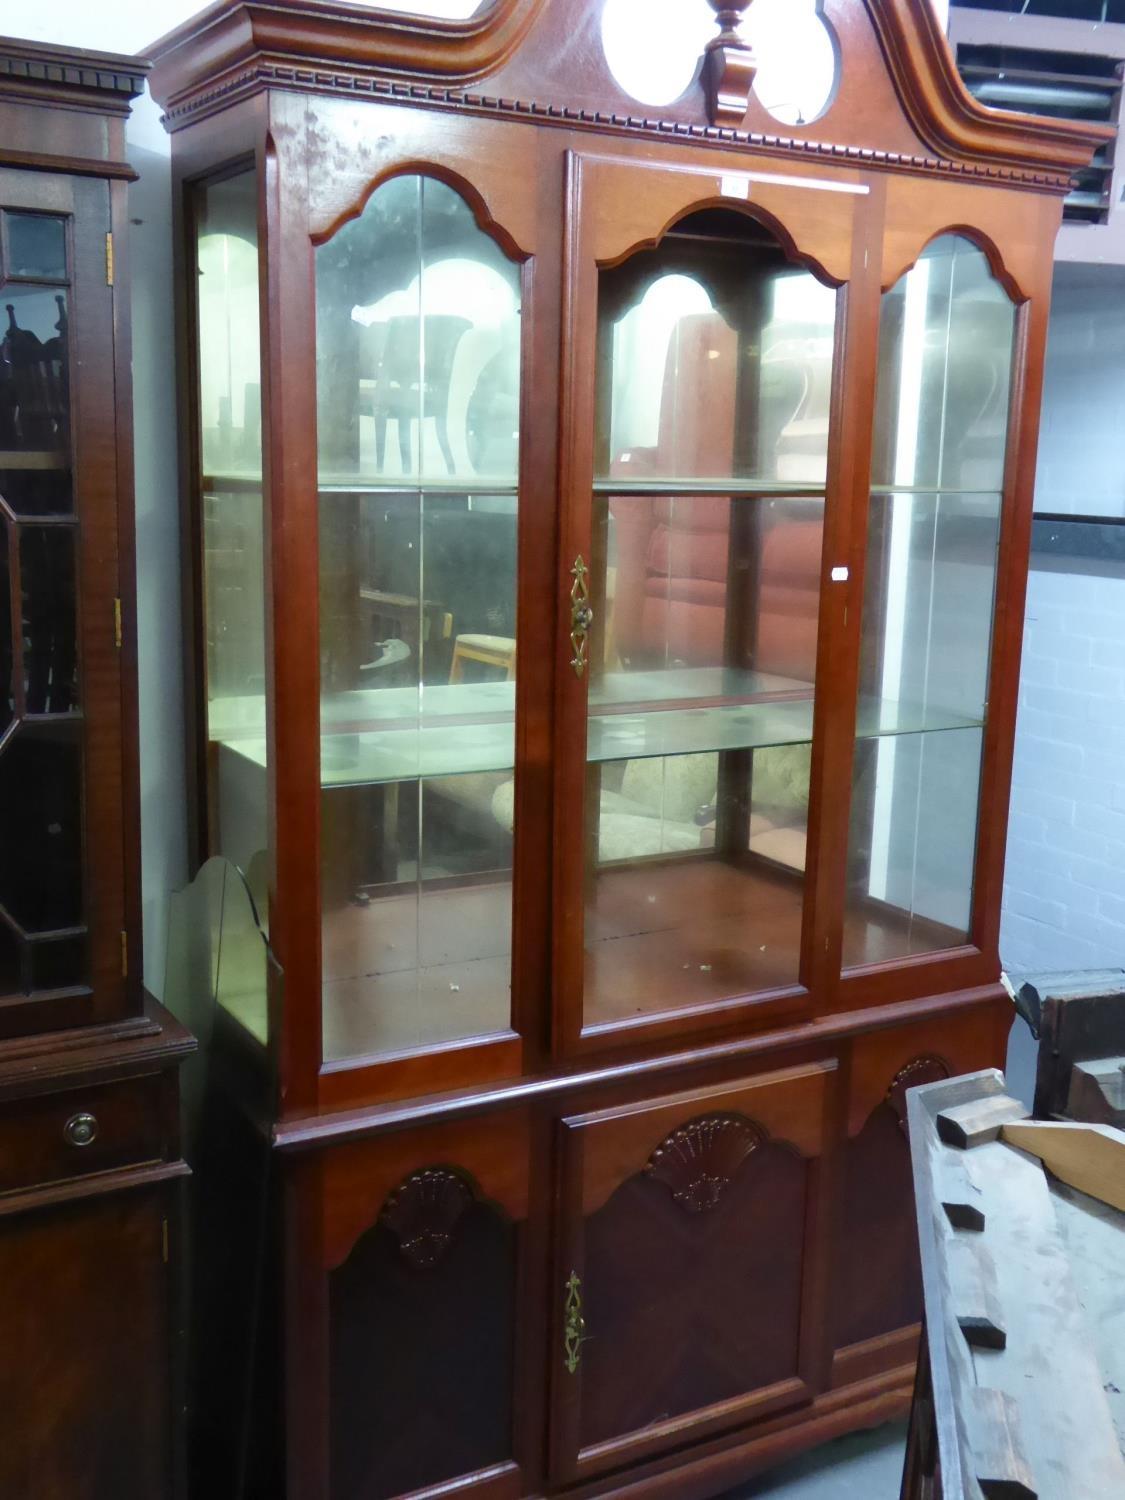 GEORGIAN STYLE MAHOGANY DISPLAY CABINET WITH BROKEN ARCH PEDIMENT, MIRRORED INTERIORS, CUPBOARD BASE - Image 2 of 2